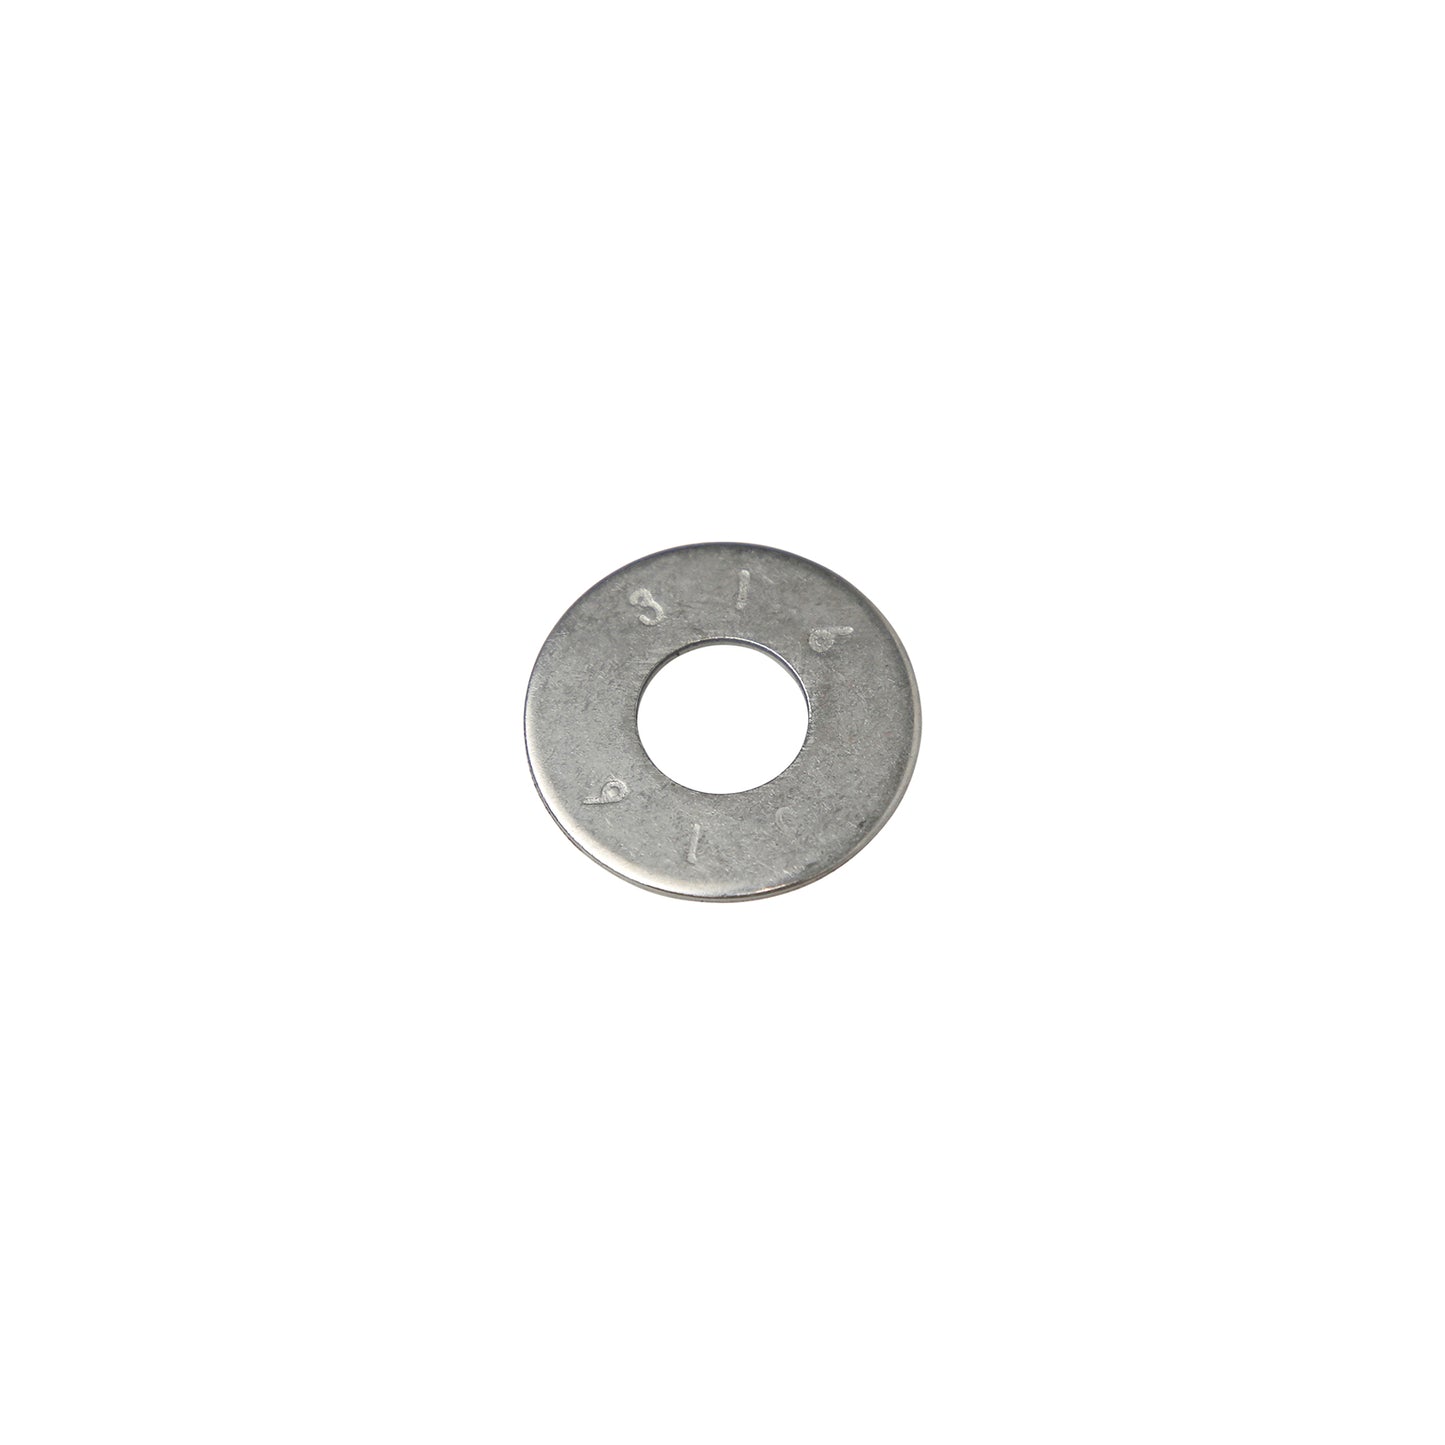 1/2" Conquest USS Flat Washer - 316 Stainless Steel